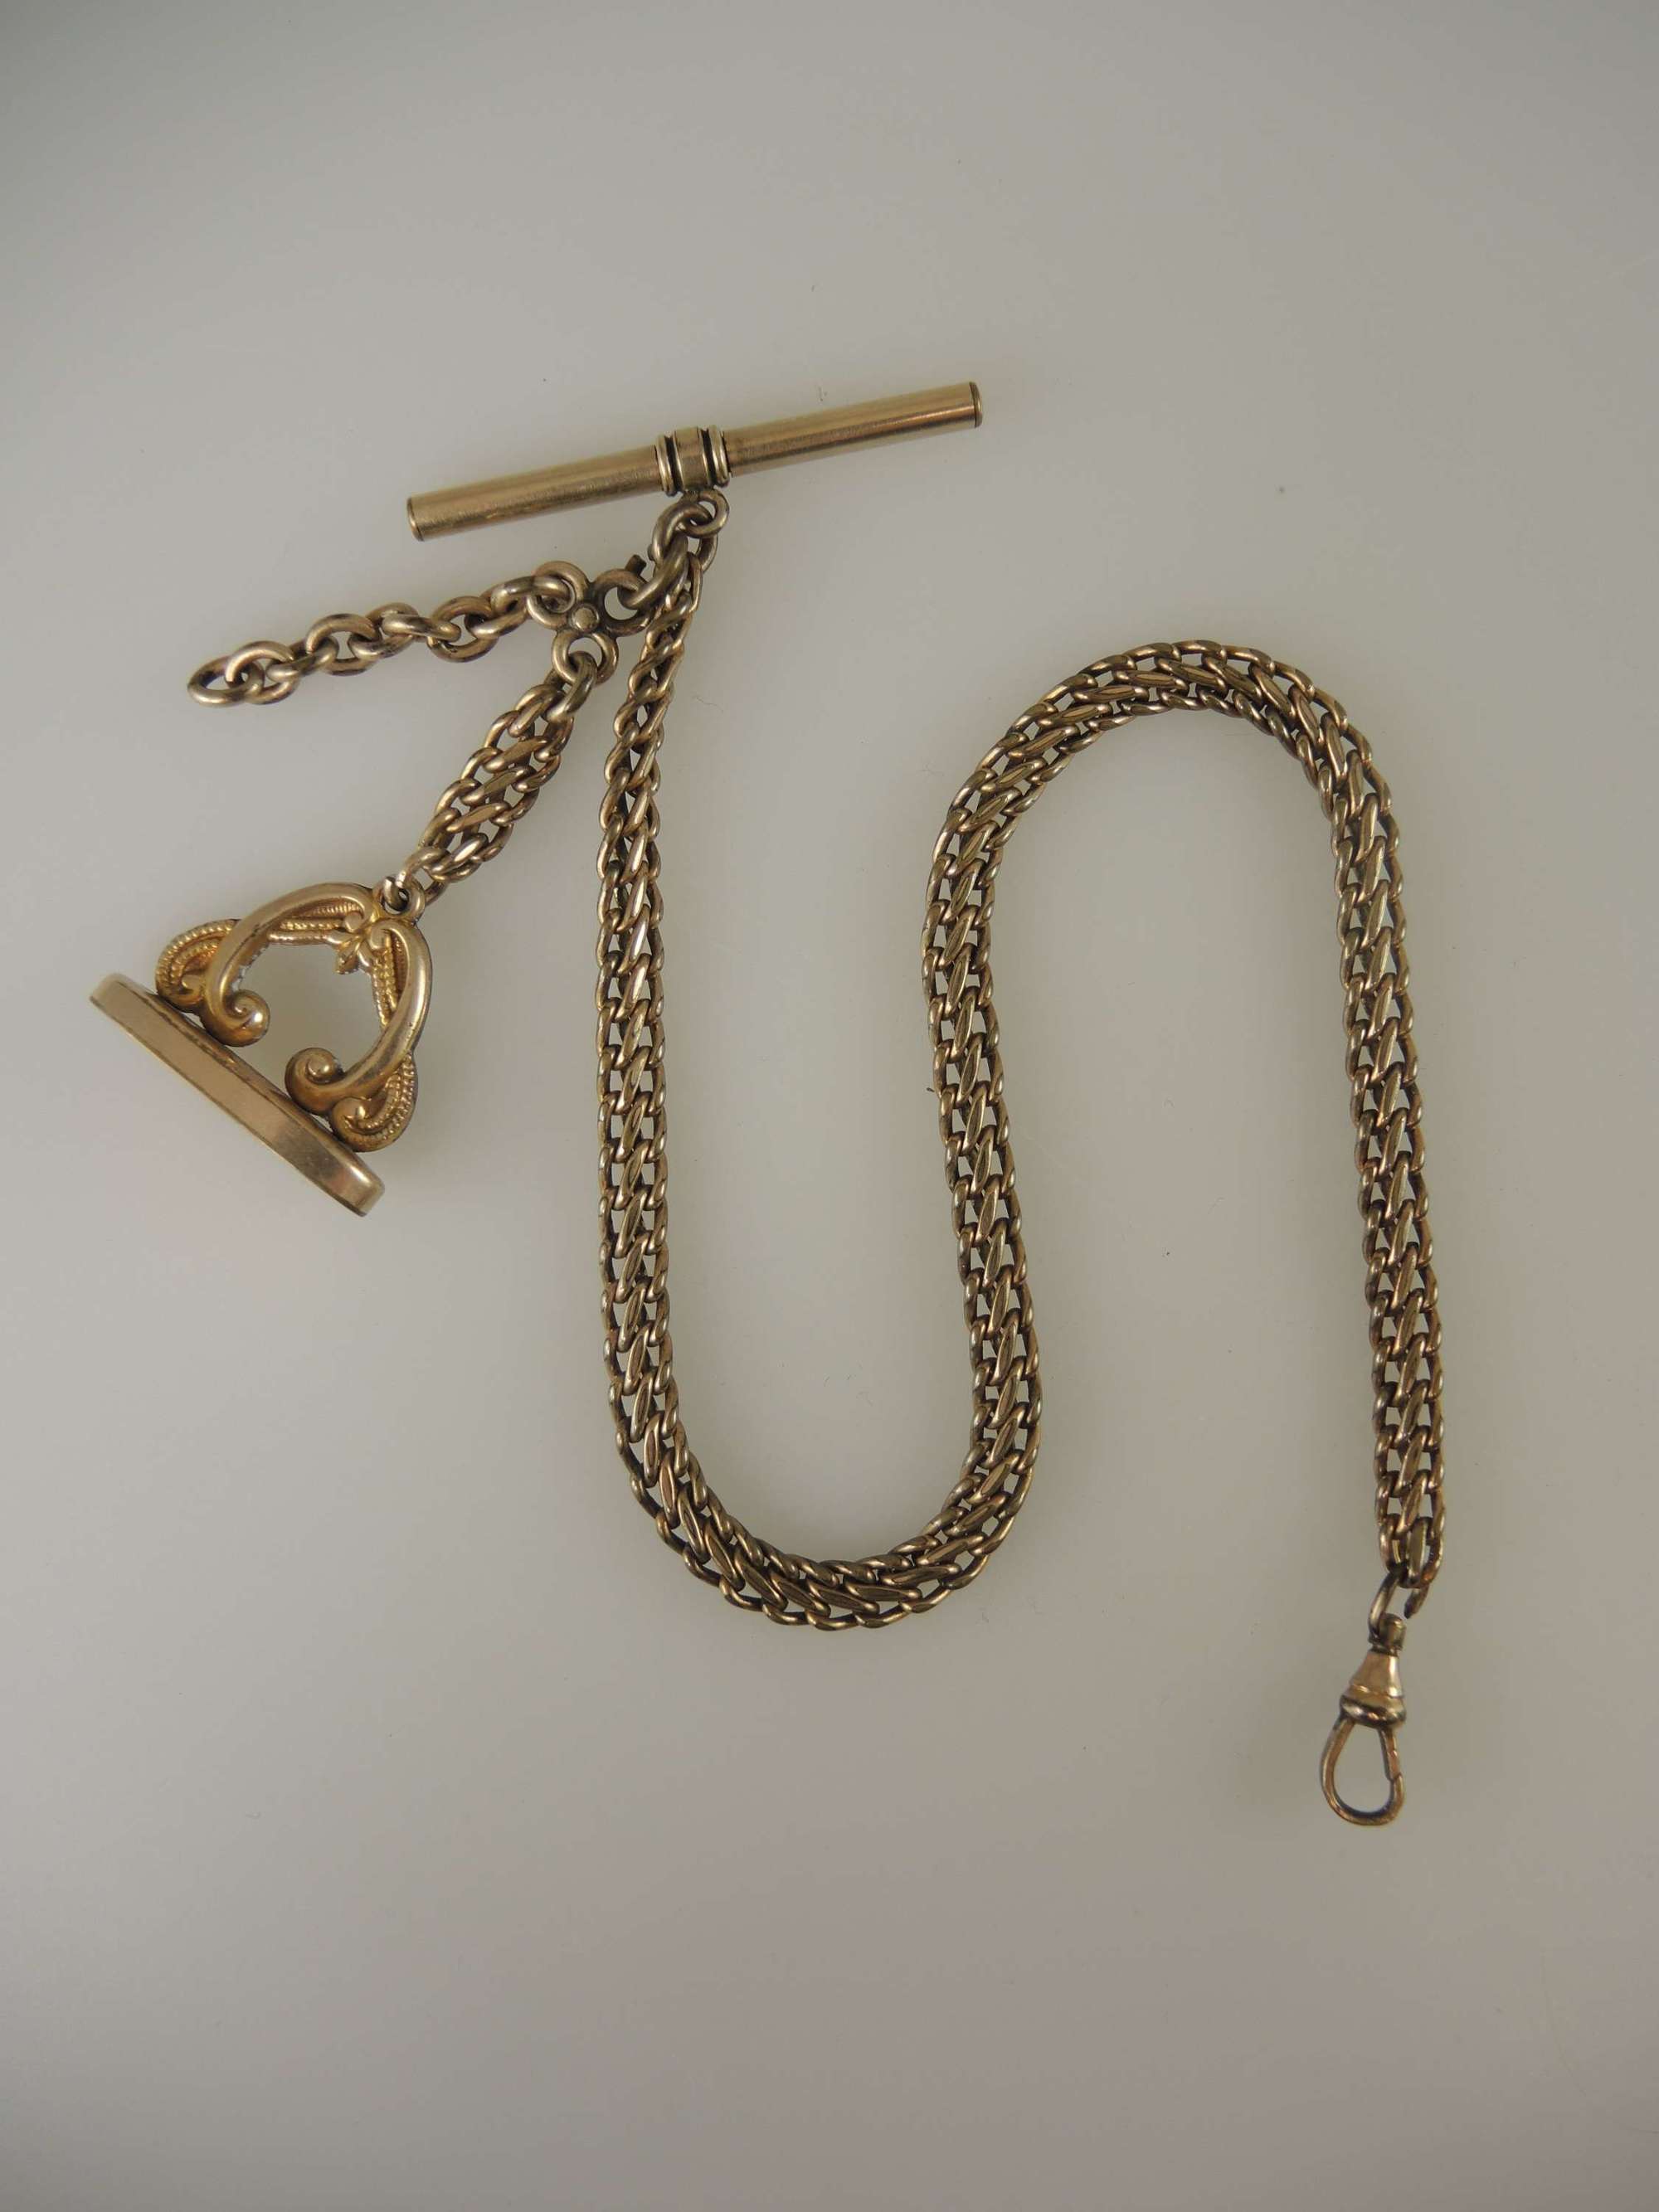 Victorian pocket watch chain with fob c1890